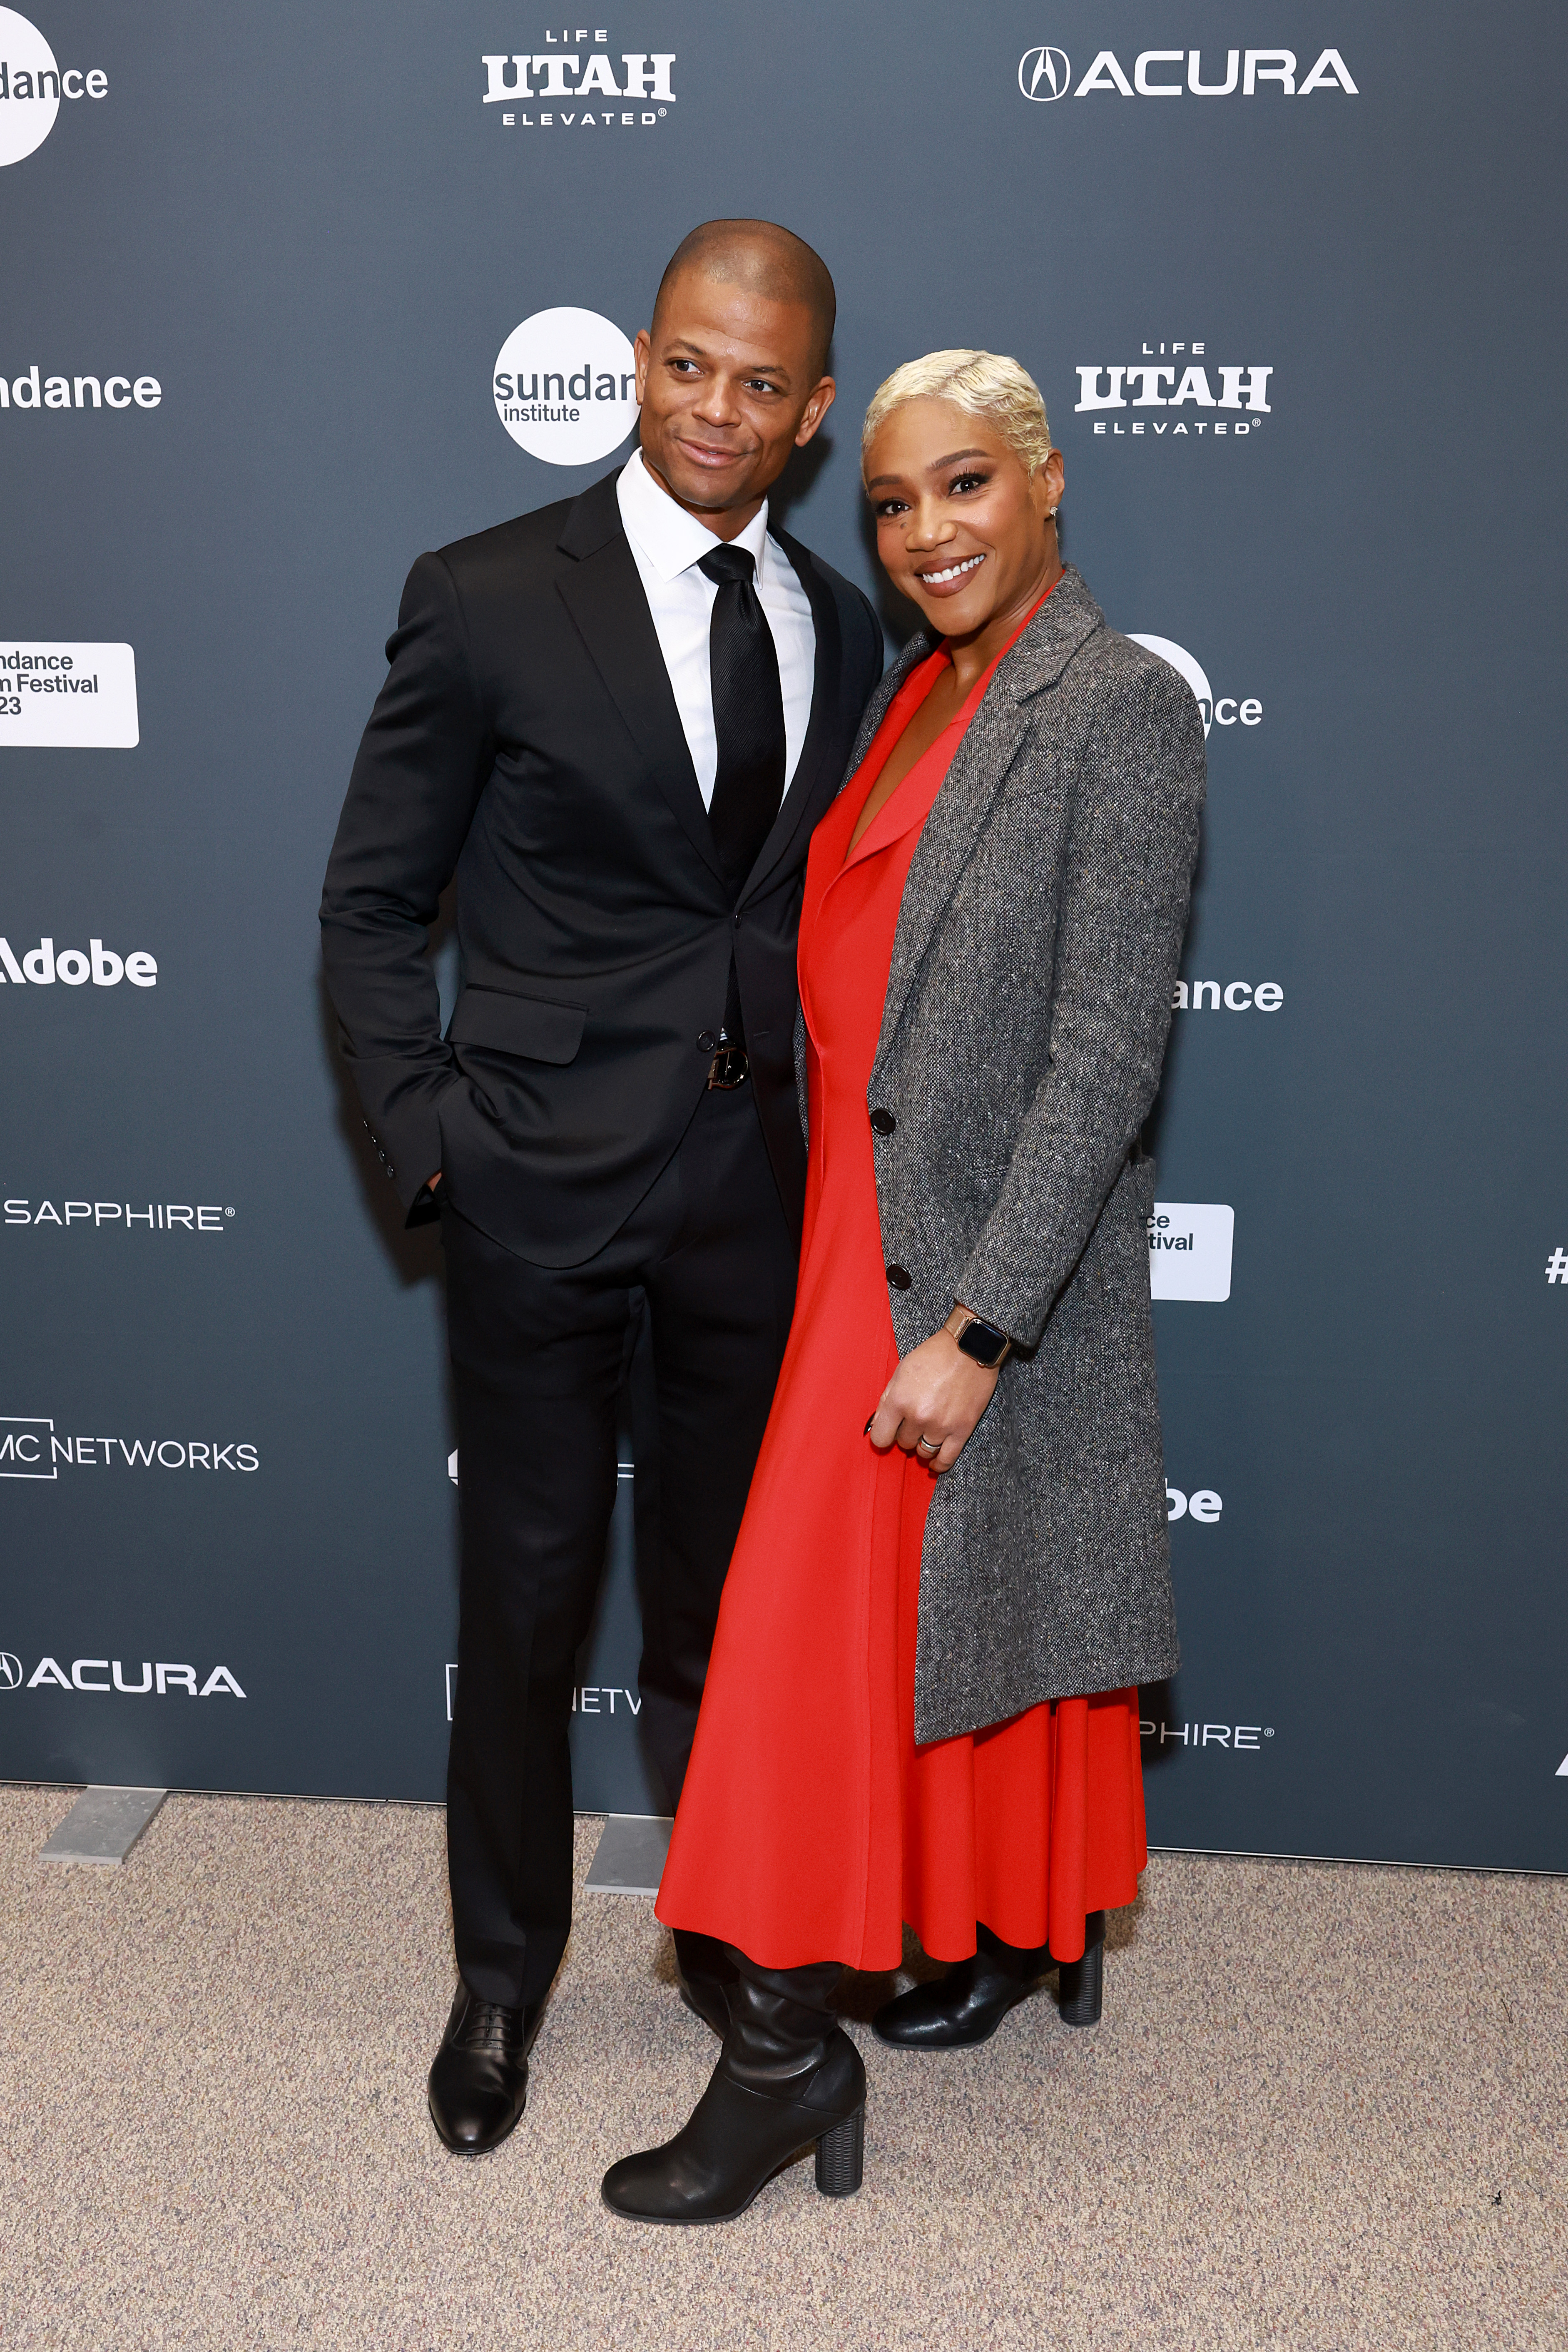 Marvin Jones and Tiffany Haddish at the 2023 Sundance Film Festival "Landscape With Invisible Hand" premiere in Park City, 2023 | Source: Getty Images